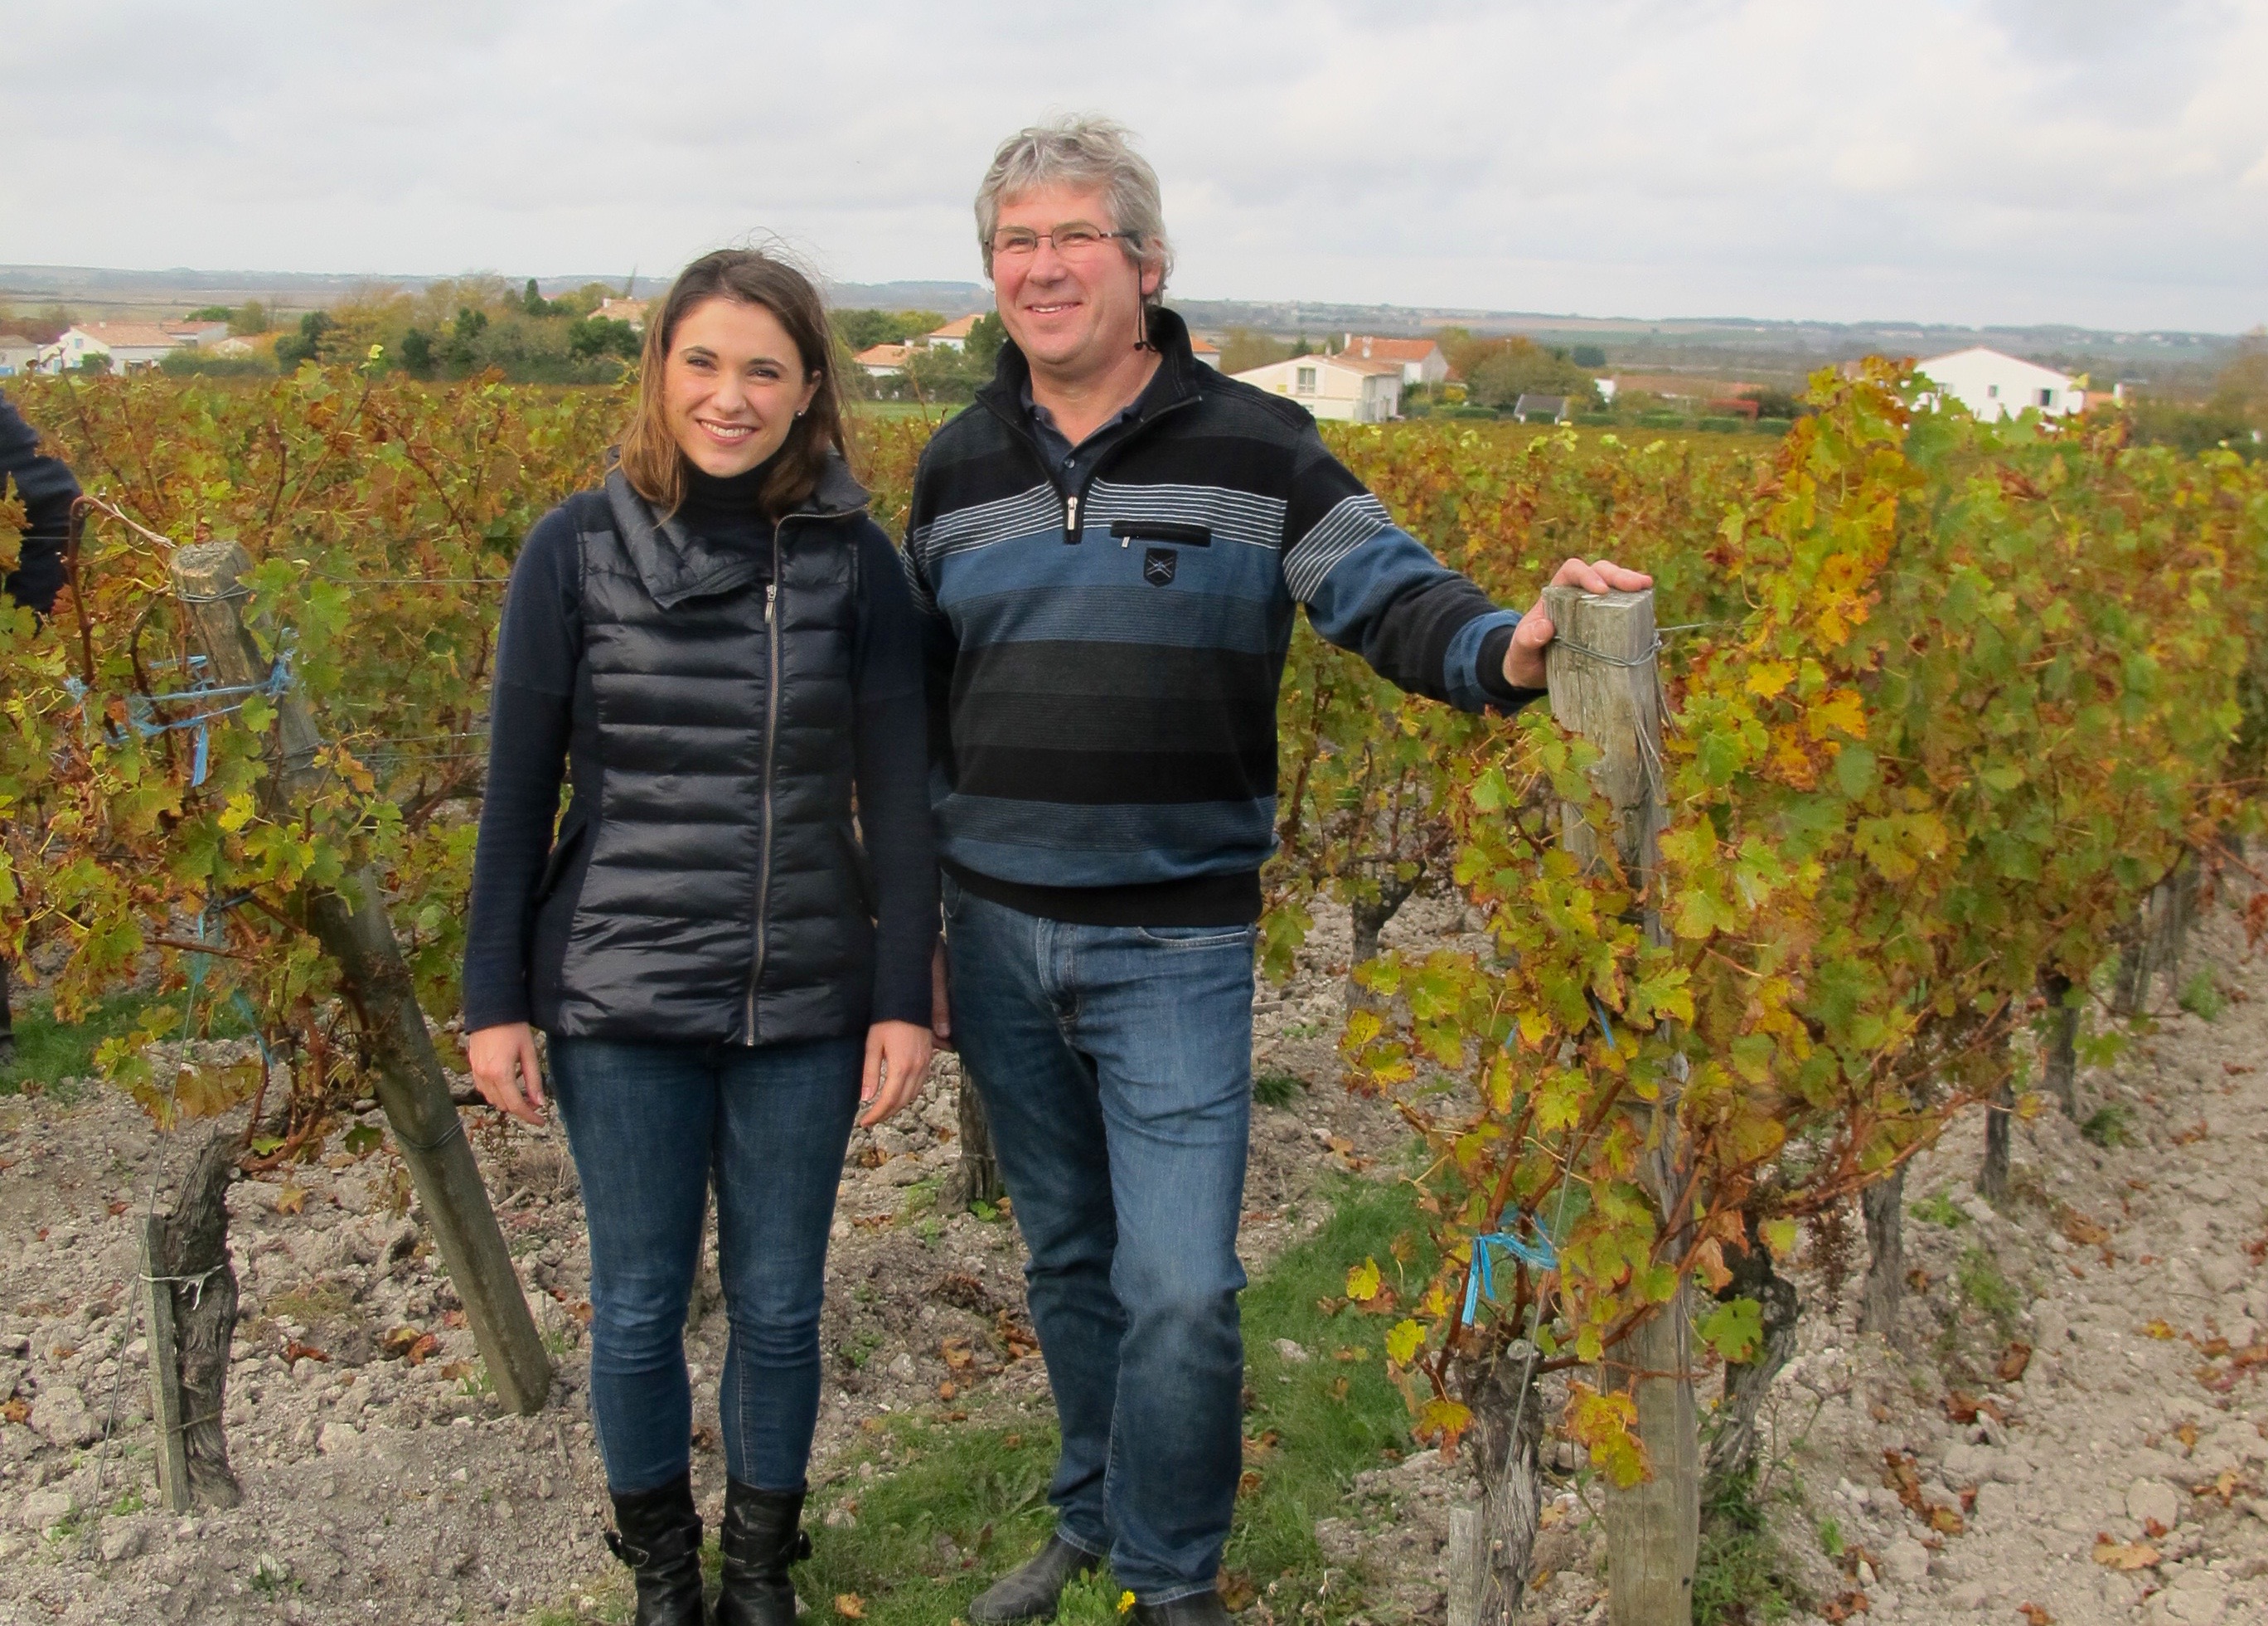 Laurie Arrivé and her father, Jean-Guy Arrivé, in their vineyards at Talmondais. The Arrivé Family have been winemakers for over 120 years. Photo by Marla Norman